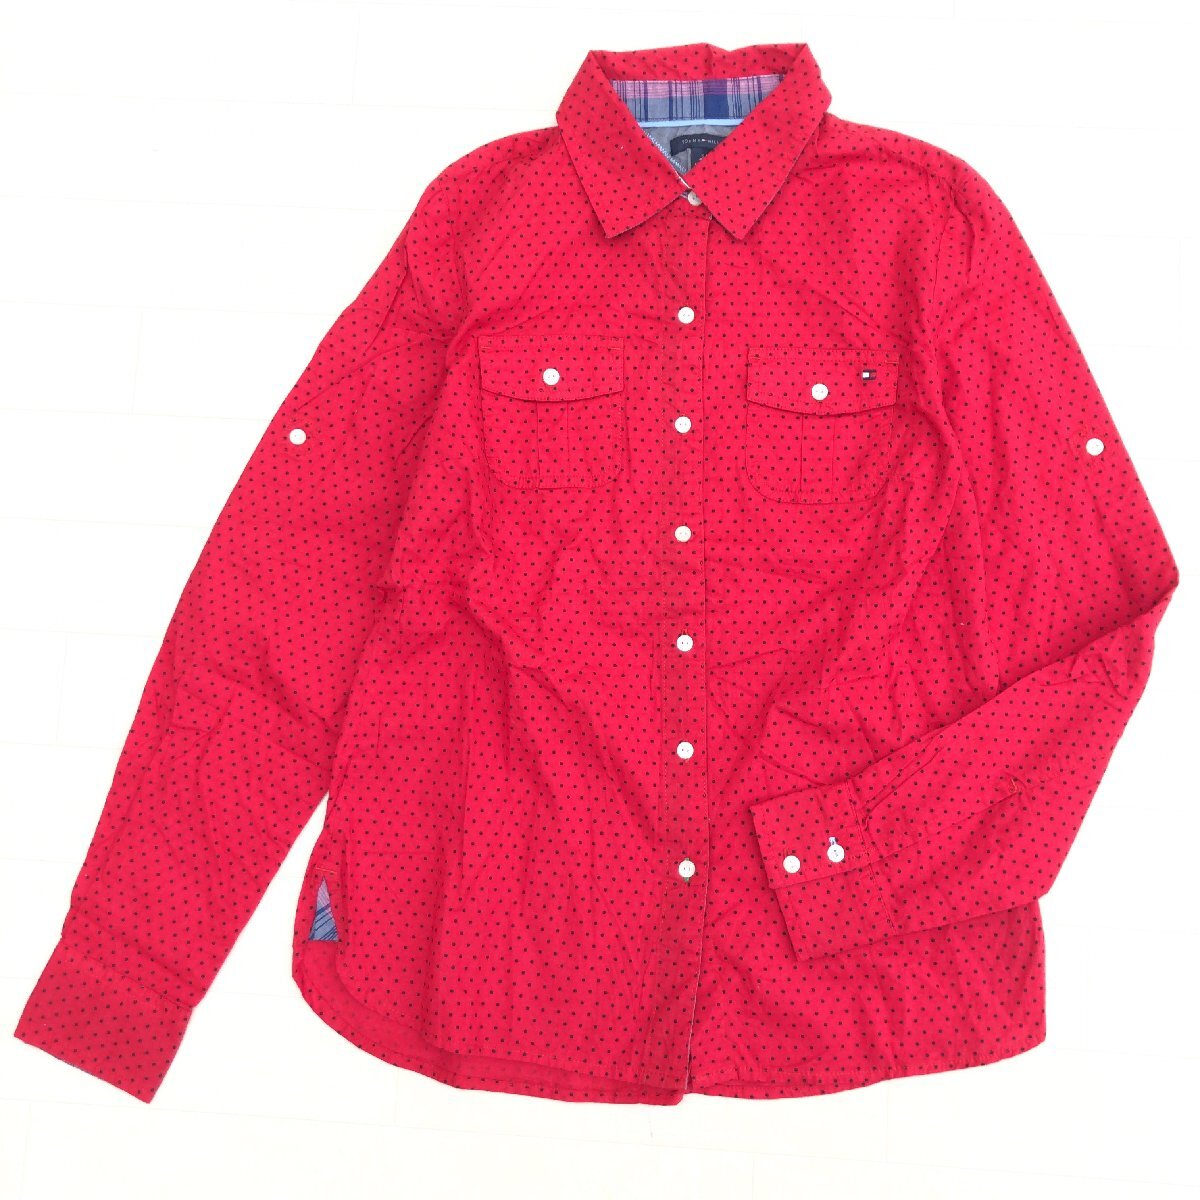  beautiful goods TOMMY HILFIGER Tommy Hilfiger cotton 100% Logo embroidery polka dot pattern shirt S(JP:M) red dot blouse long sleeve domestic regular goods for women 